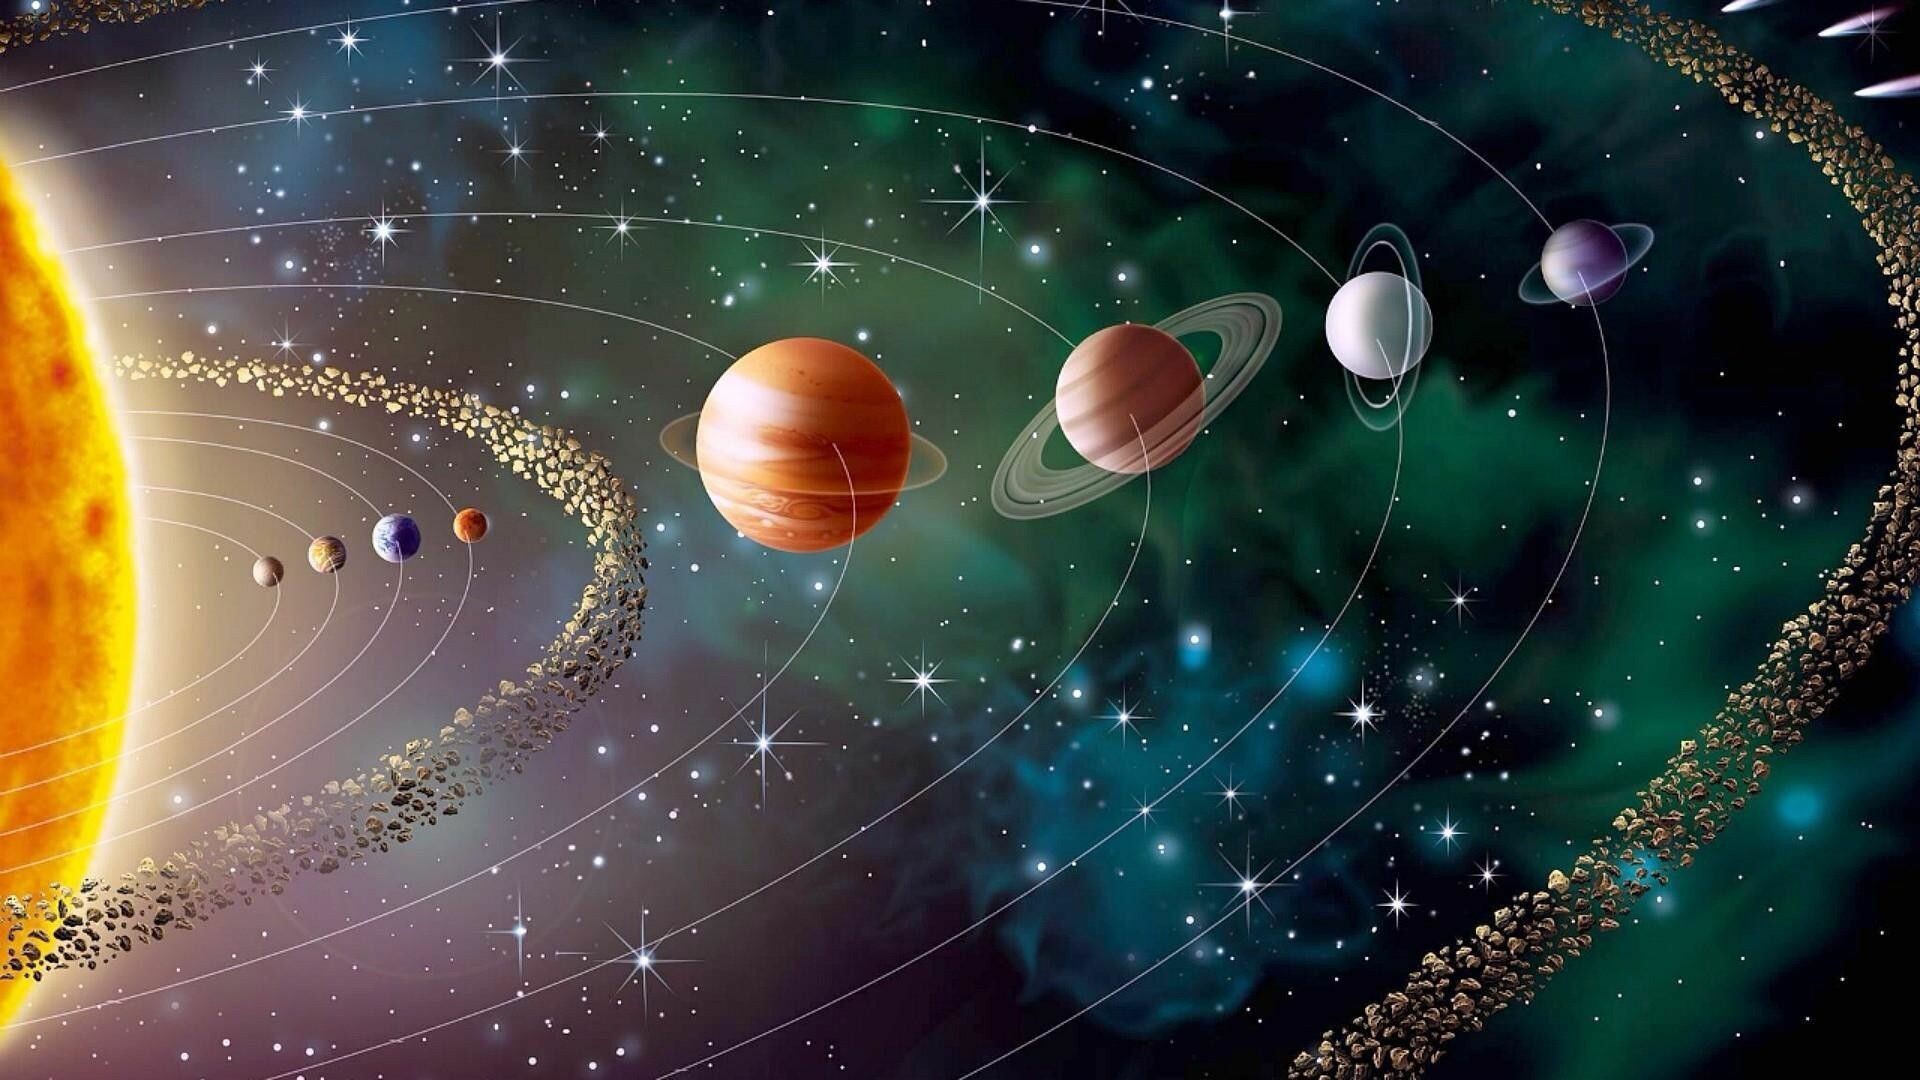 Solar System: The Sun and all the planets, asteroids, and other objects that orbit the Sun. 1920x1080 Full HD Background.